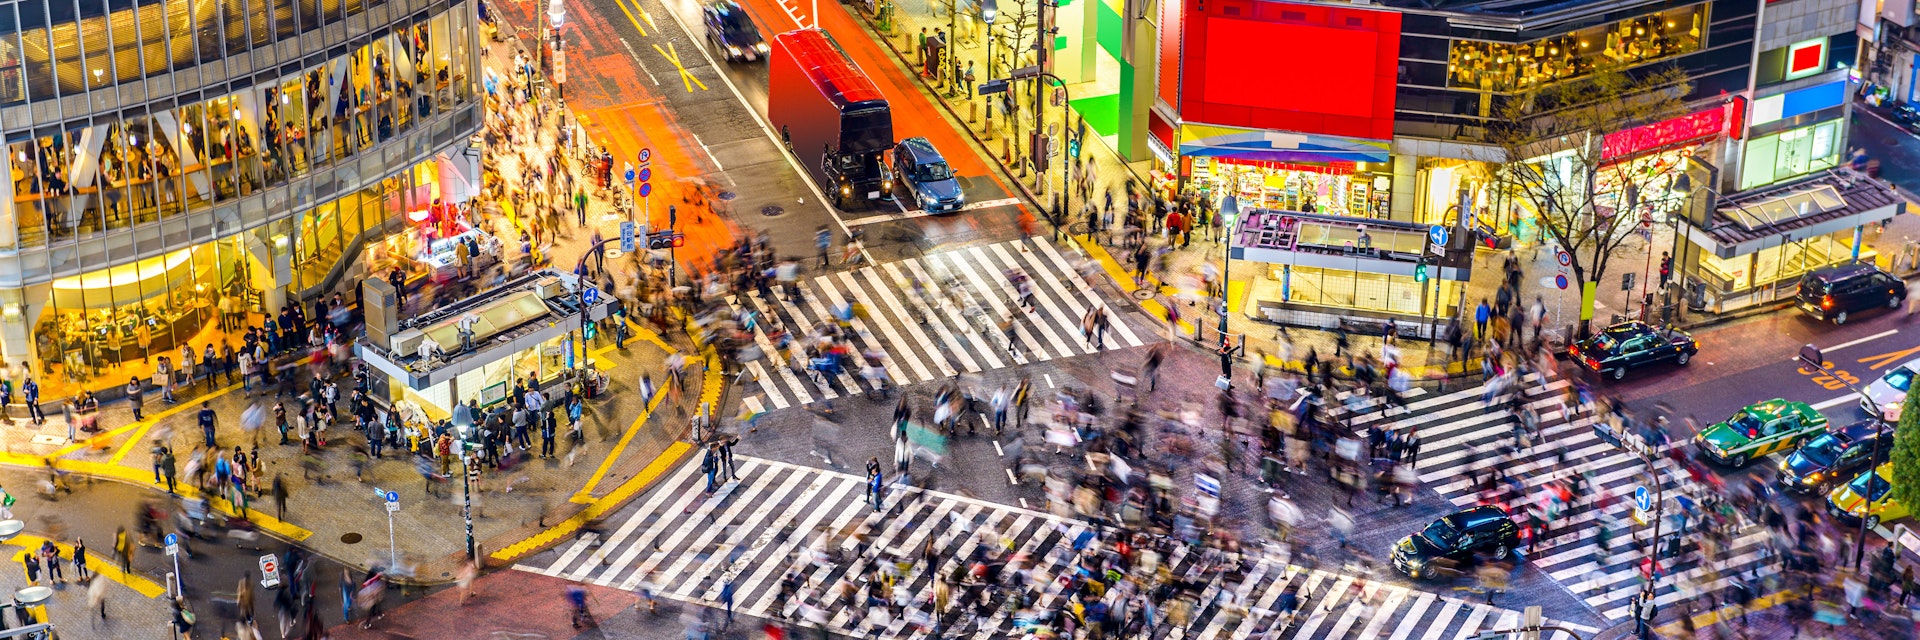 Tokyo, Japan view of Shibuya Crossing, one of the busiest crosswalks in the world.
aerial, architecture, asia, asian, billboards, buildings, business, city, cityscape, commercial, cross, crosswalk, crowd, district, downtown, dusk, evening, famous, futuristic, japan, japanese, landmark, lights, location, metropolis, metropolitan, modern, morning, night, office, pedestrian, people, place, plaza, road, scene, scenery, scenic, shibuya, shopping, signs, skyline, skyscrapers, square, street, tokyo, twilight, urban, view, walk